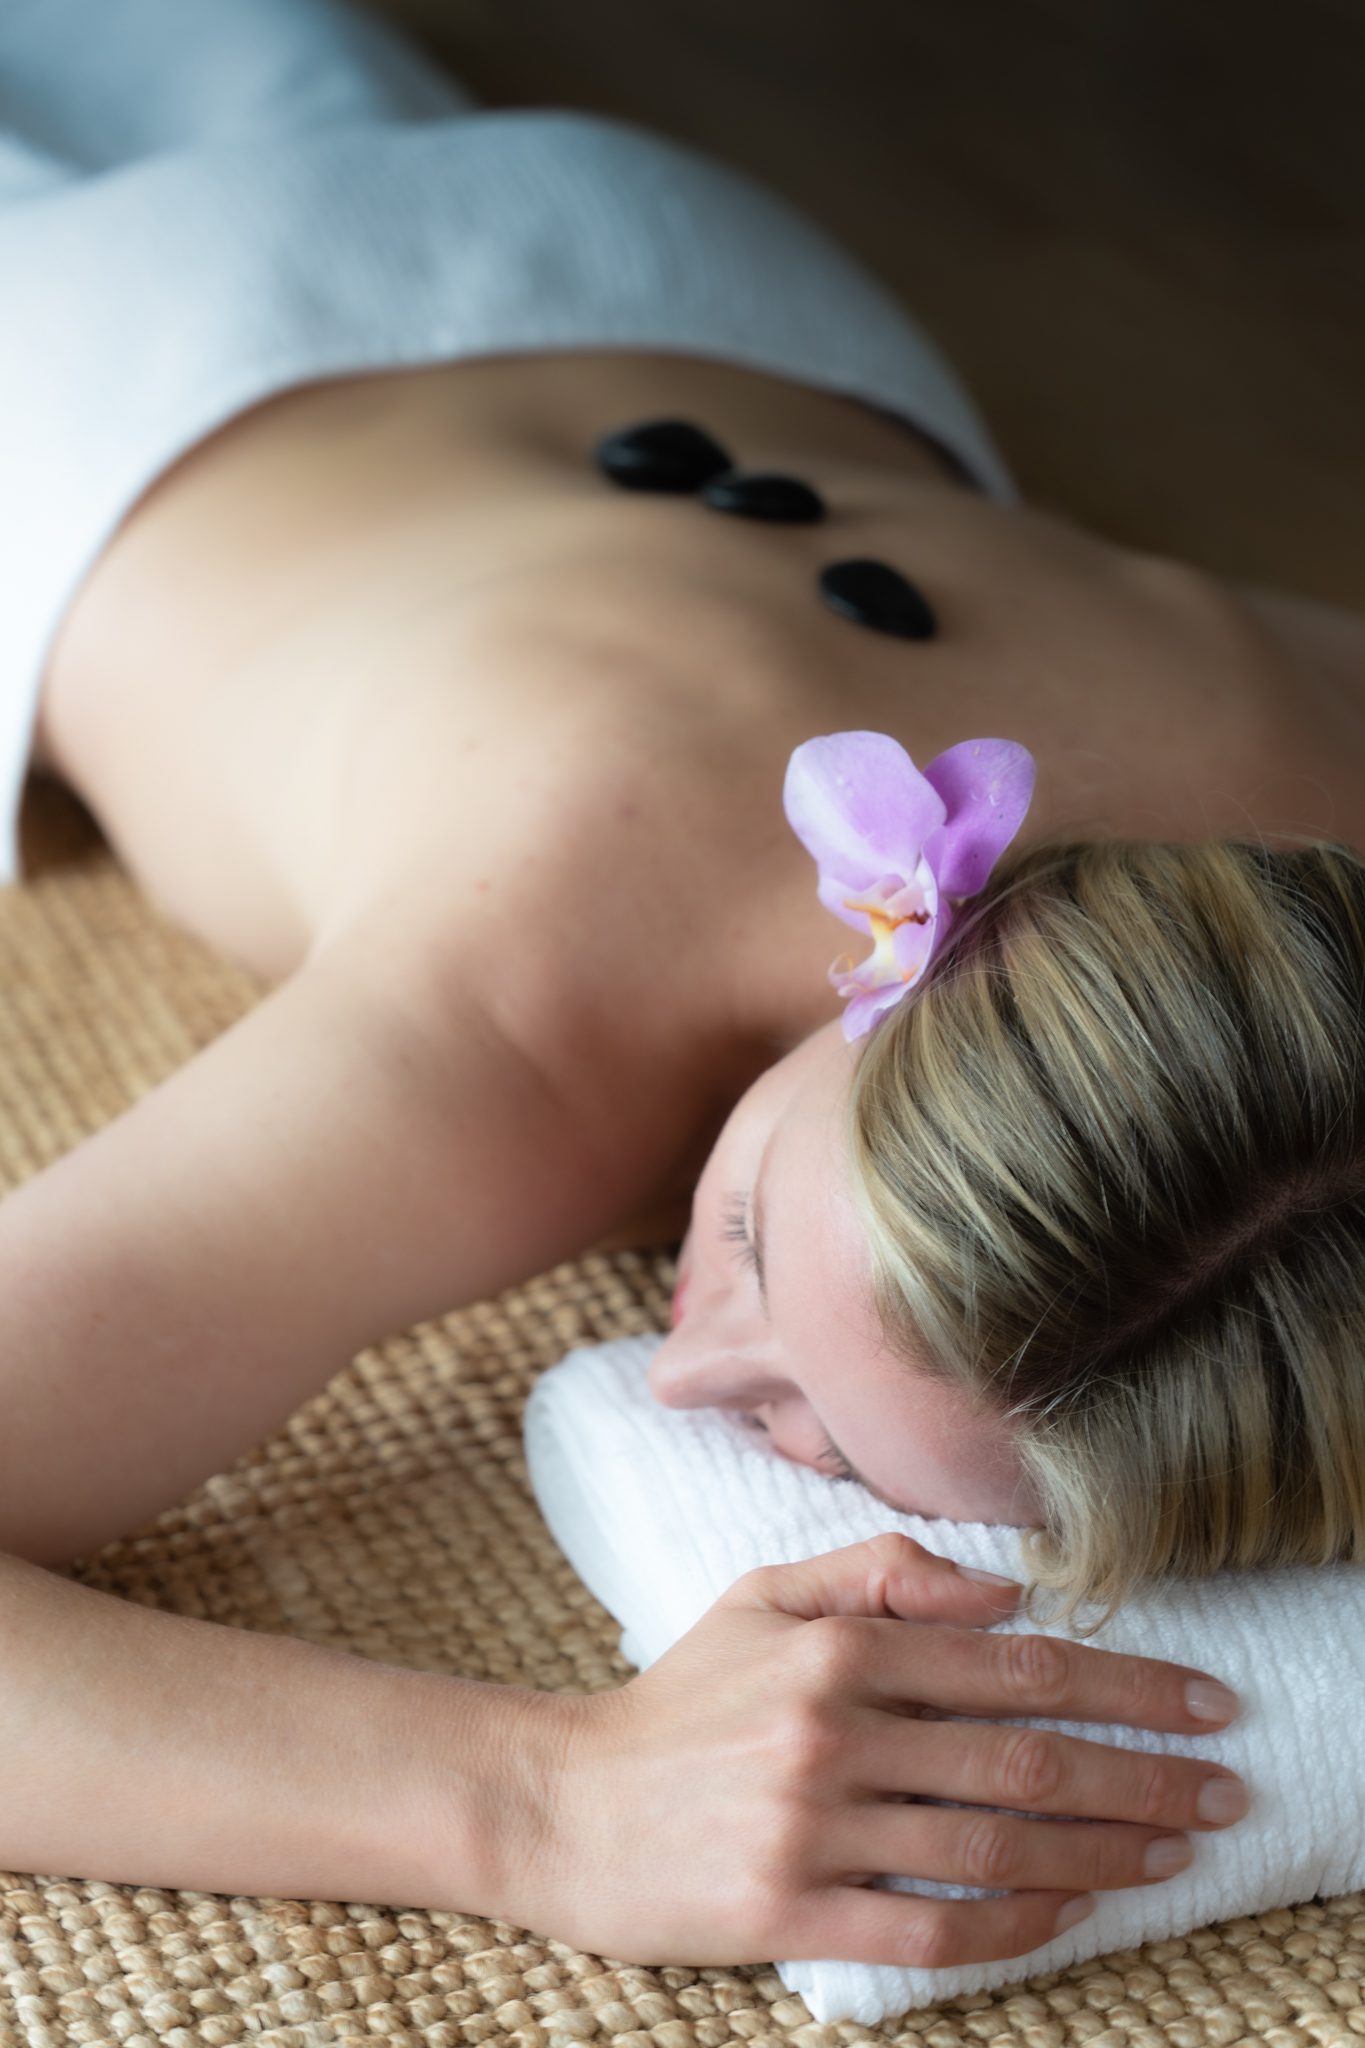 blonde woman lying facedown on a mat with a pink flower in her hair receiving a massage treatment of hot stones on her bare back at heartwood farm cottage